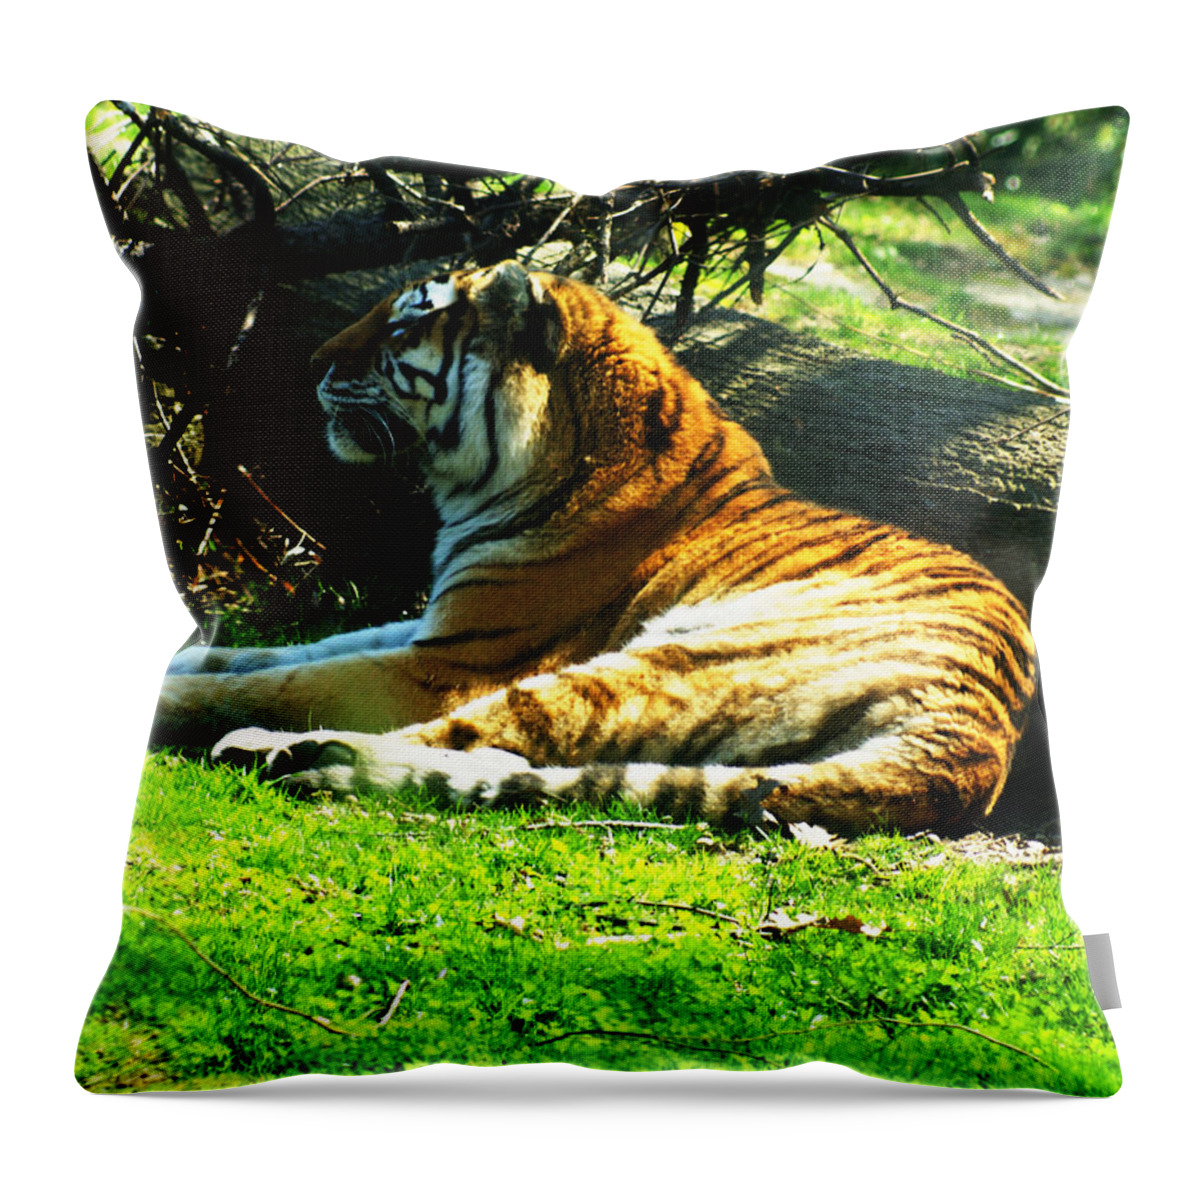 Tiger Throw Pillow featuring the photograph Tiger Too by M Three Photos